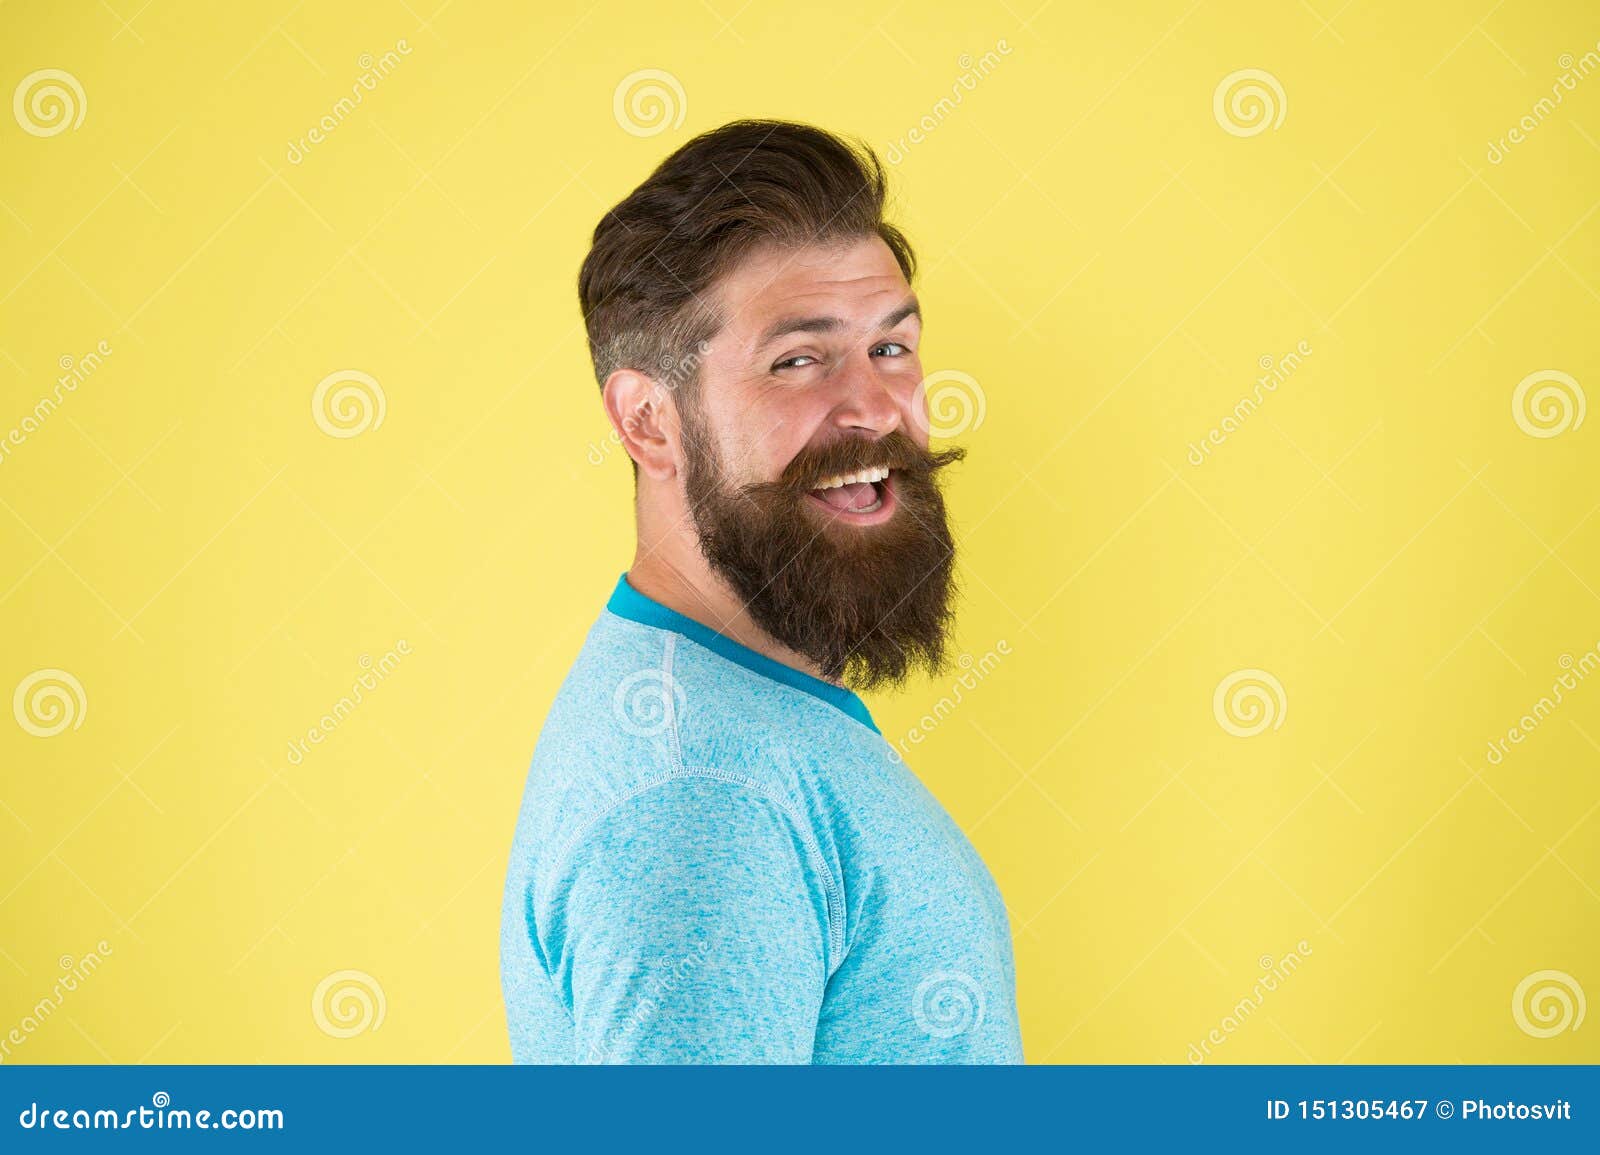 His Bearded Hair Looks Styled. Bearded Man Smiling on Yellow Background ...